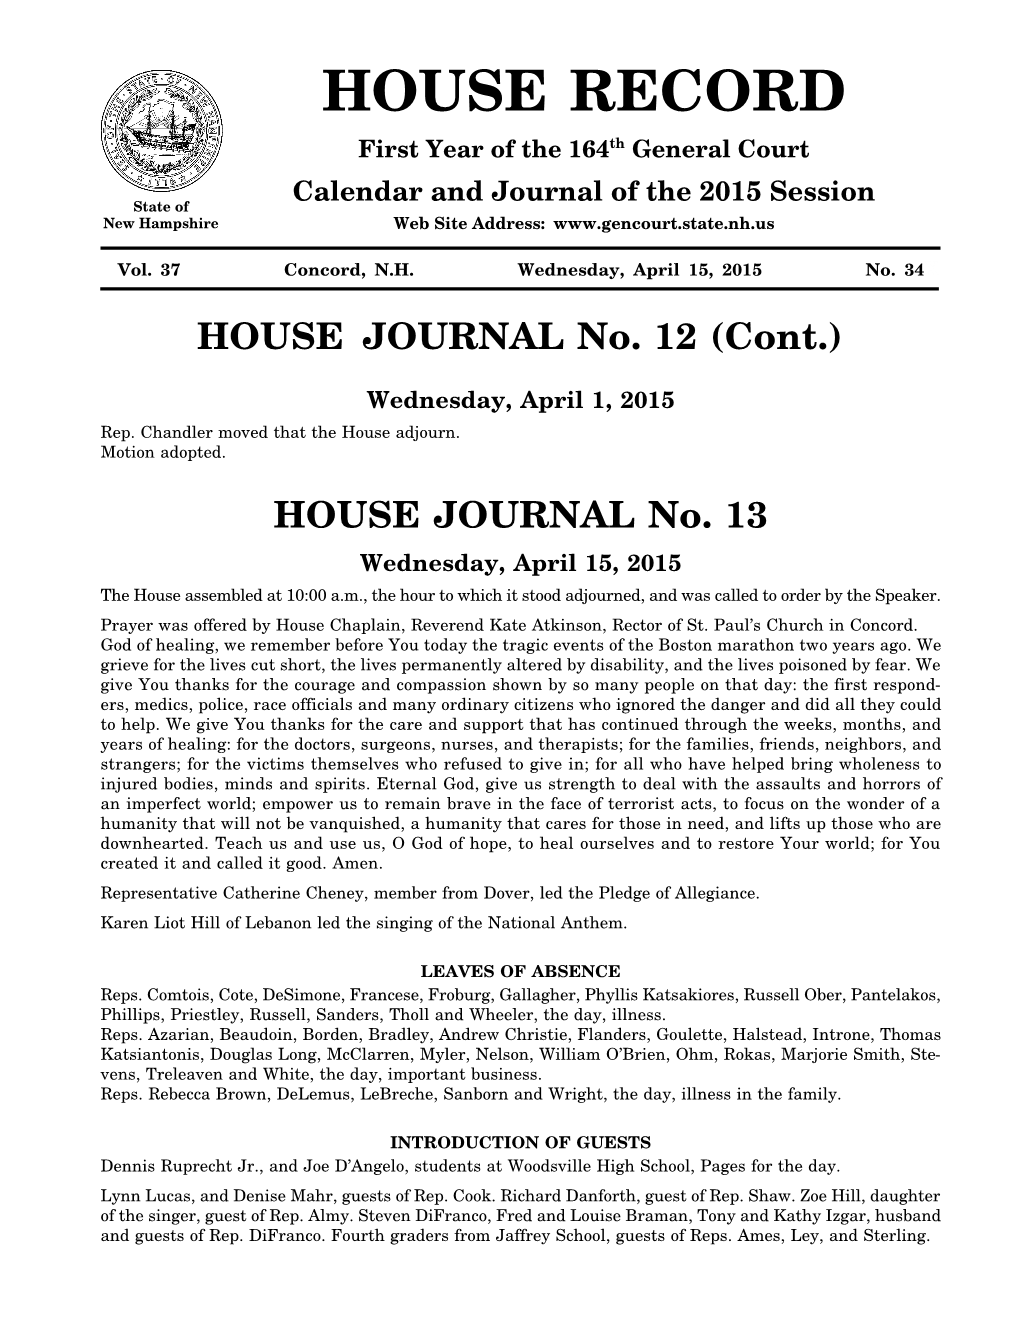 HOUSE JOURNAL No. 13 Wednesday, April 15, 2015 the House Assembled at 10:00 A.M., the Hour to Which It Stood Adjourned, and Was Called to Order by the Speaker